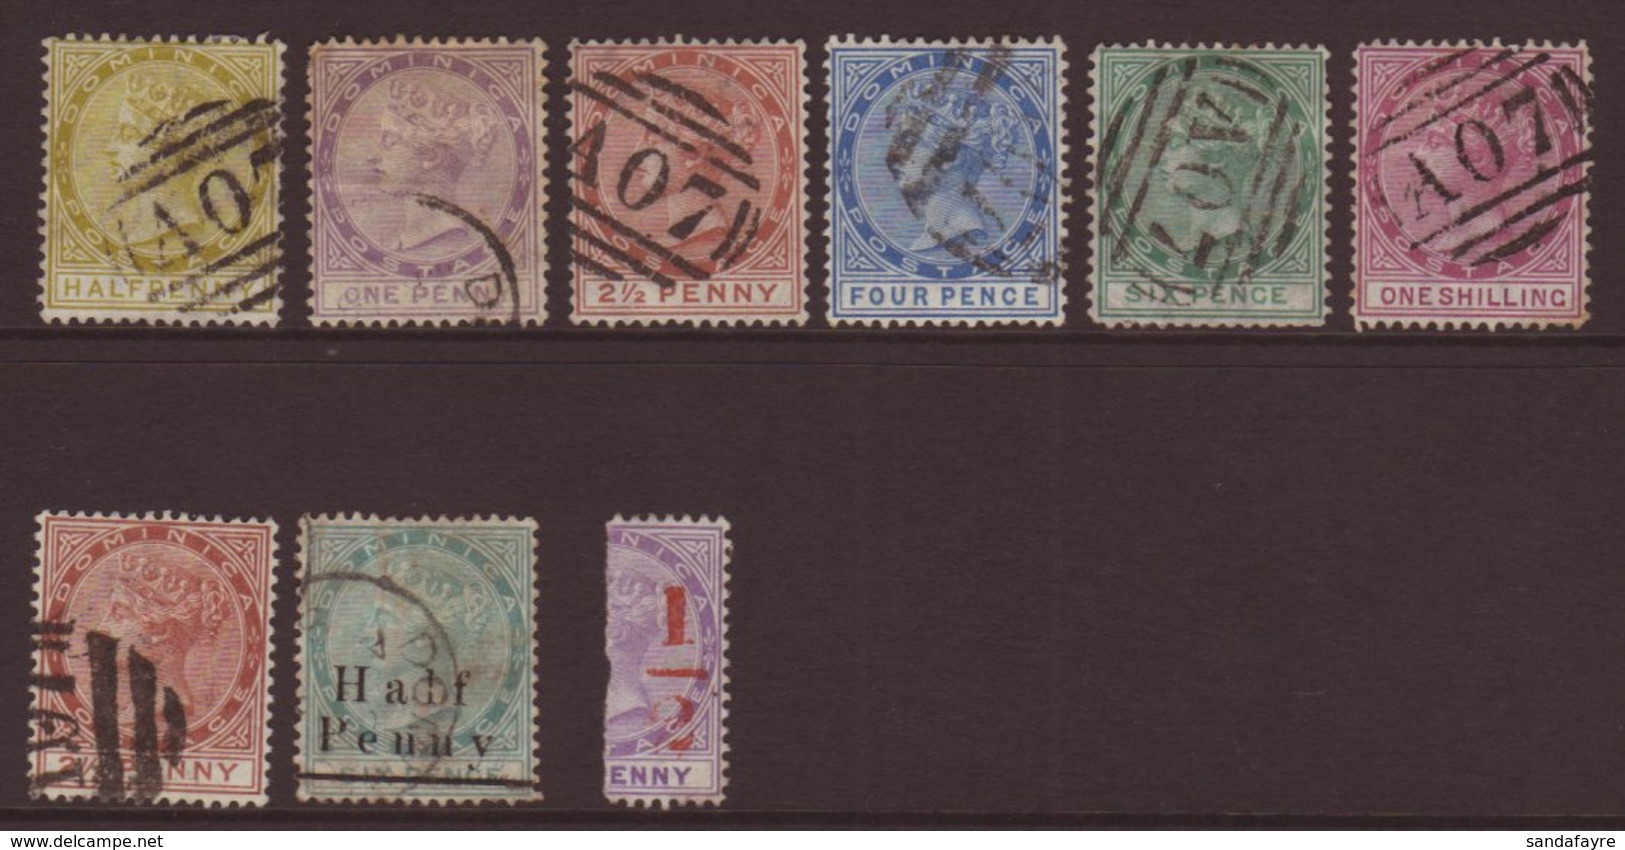 1877-86  A Used Group With 1877-79 CC Set, 1884 2½d, 1886 ½d On 6d, Also 1882 ½ On Half 1d Unused. (9 Stamps) For More I - Dominica (...-1978)